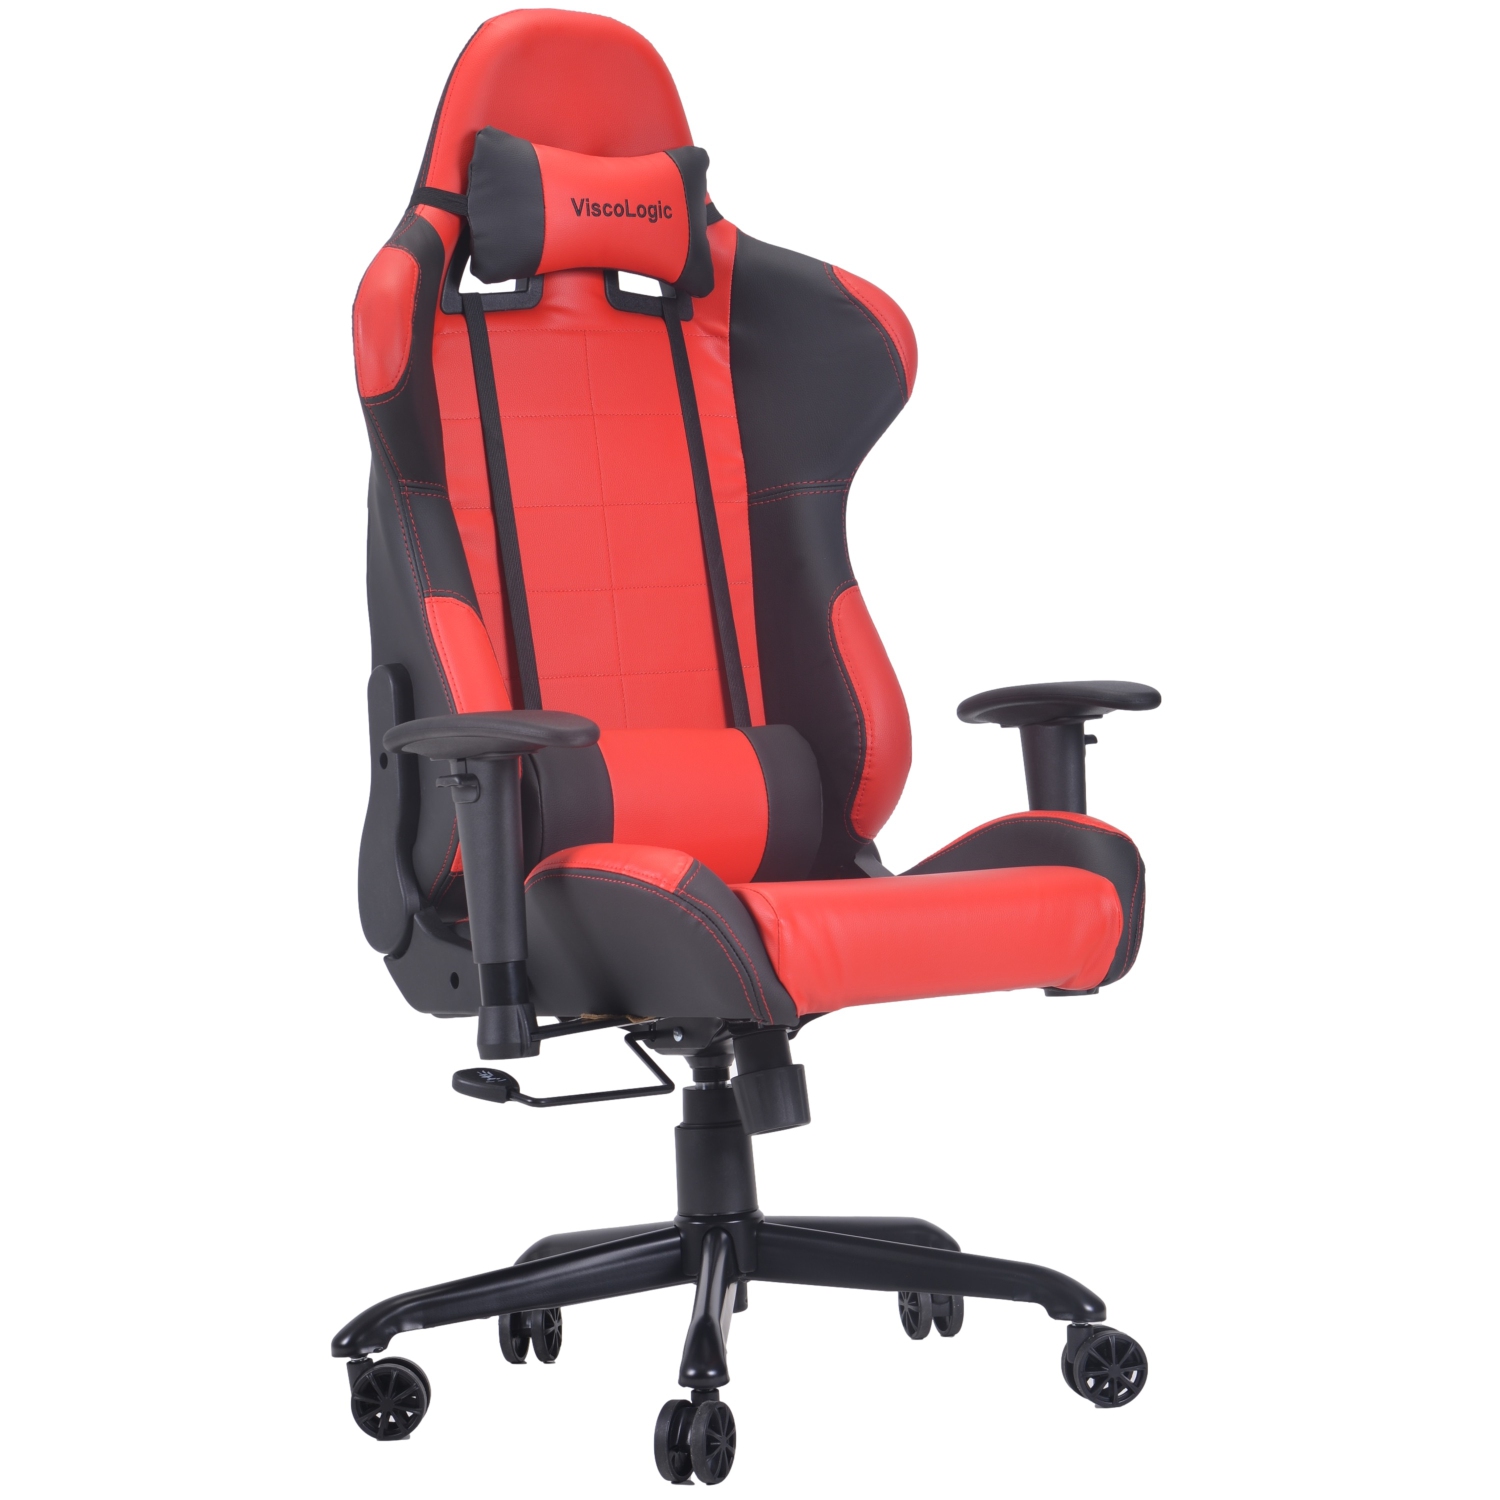 ViscoLogic CAYENNE | Premium Grade | Heavy Duty Metal Frame Constructed | Adjustable E-Sports Style | Tilt, Rock, Lock | Ergonomic Gaming Chair - Cayenne Red